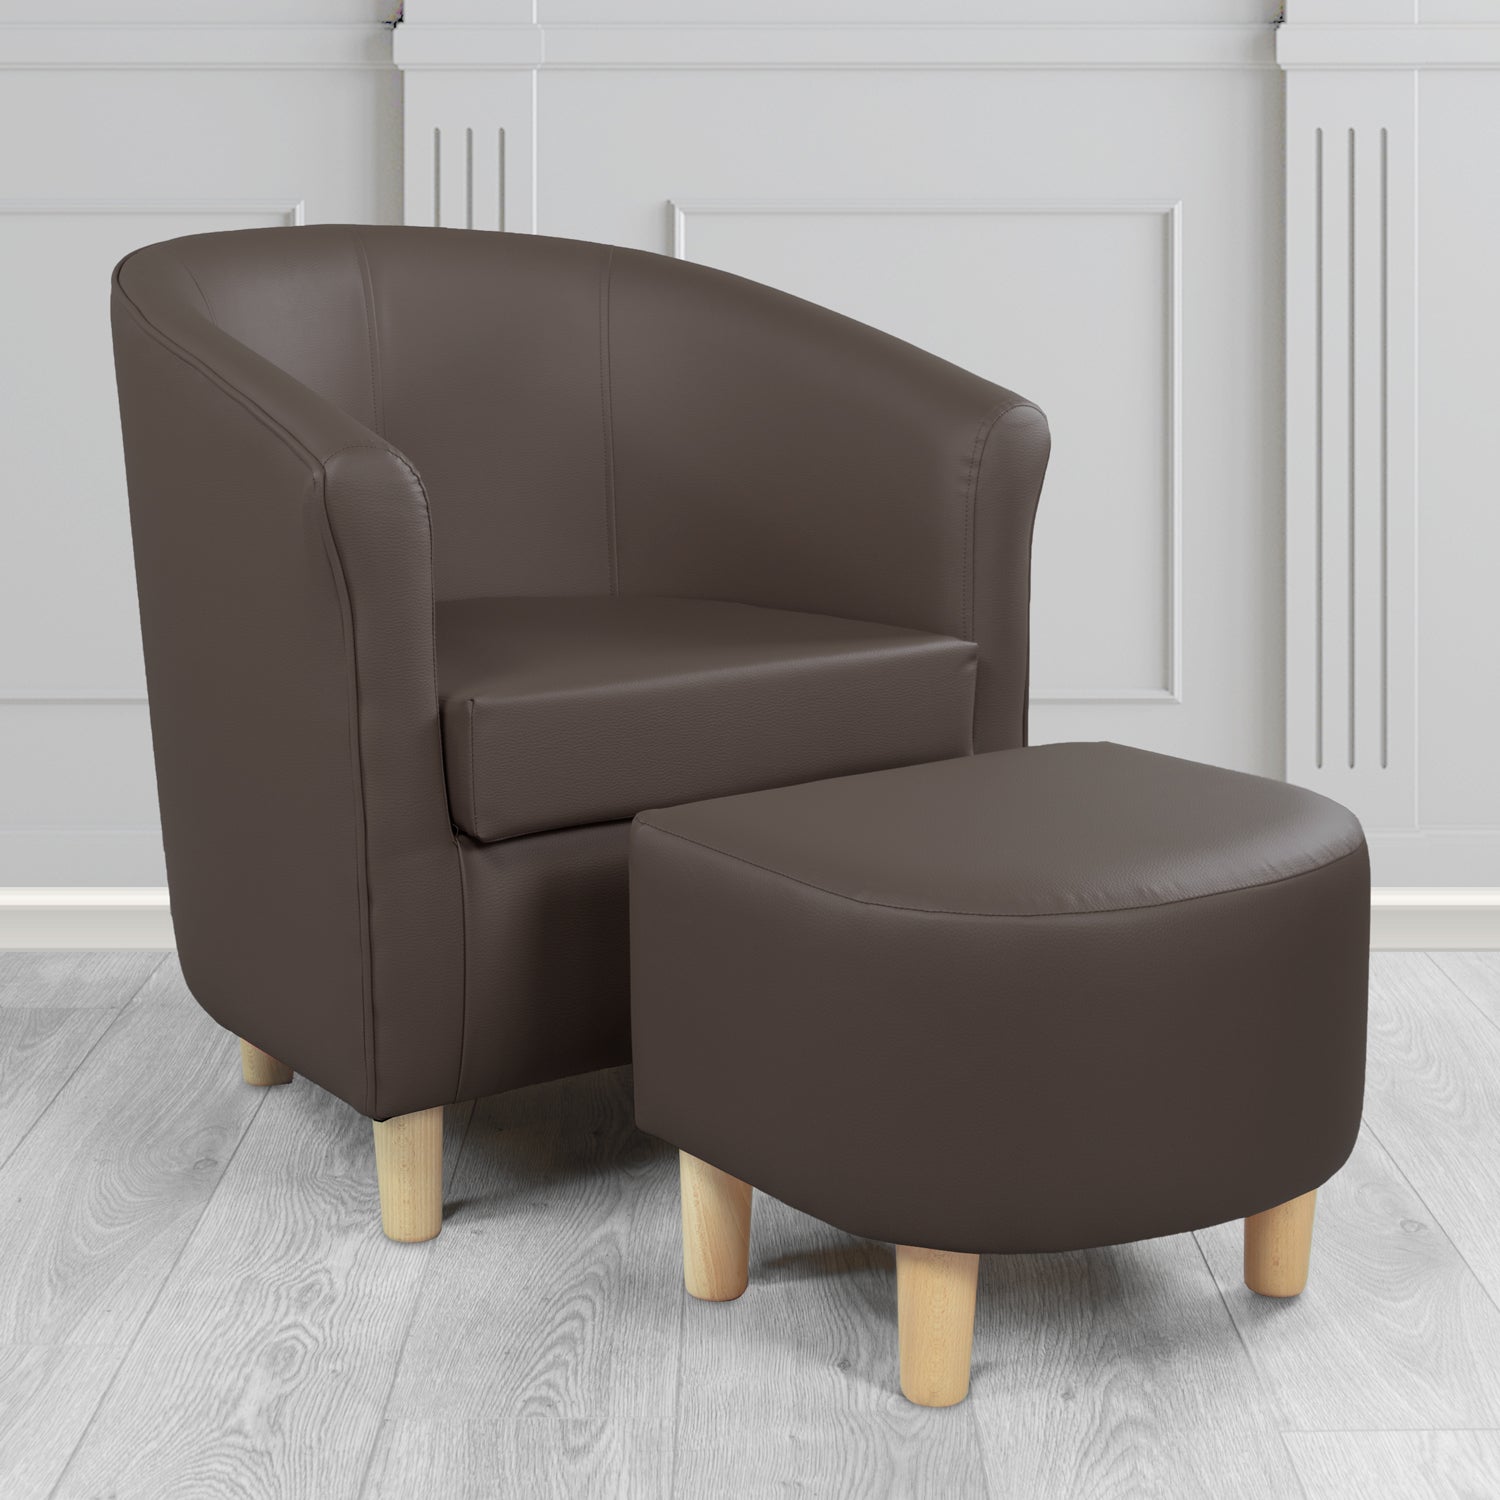 Tuscany Tub Chair with Footstool Set in Madrid Chocolate Faux Leather - The Tub Chair Shop